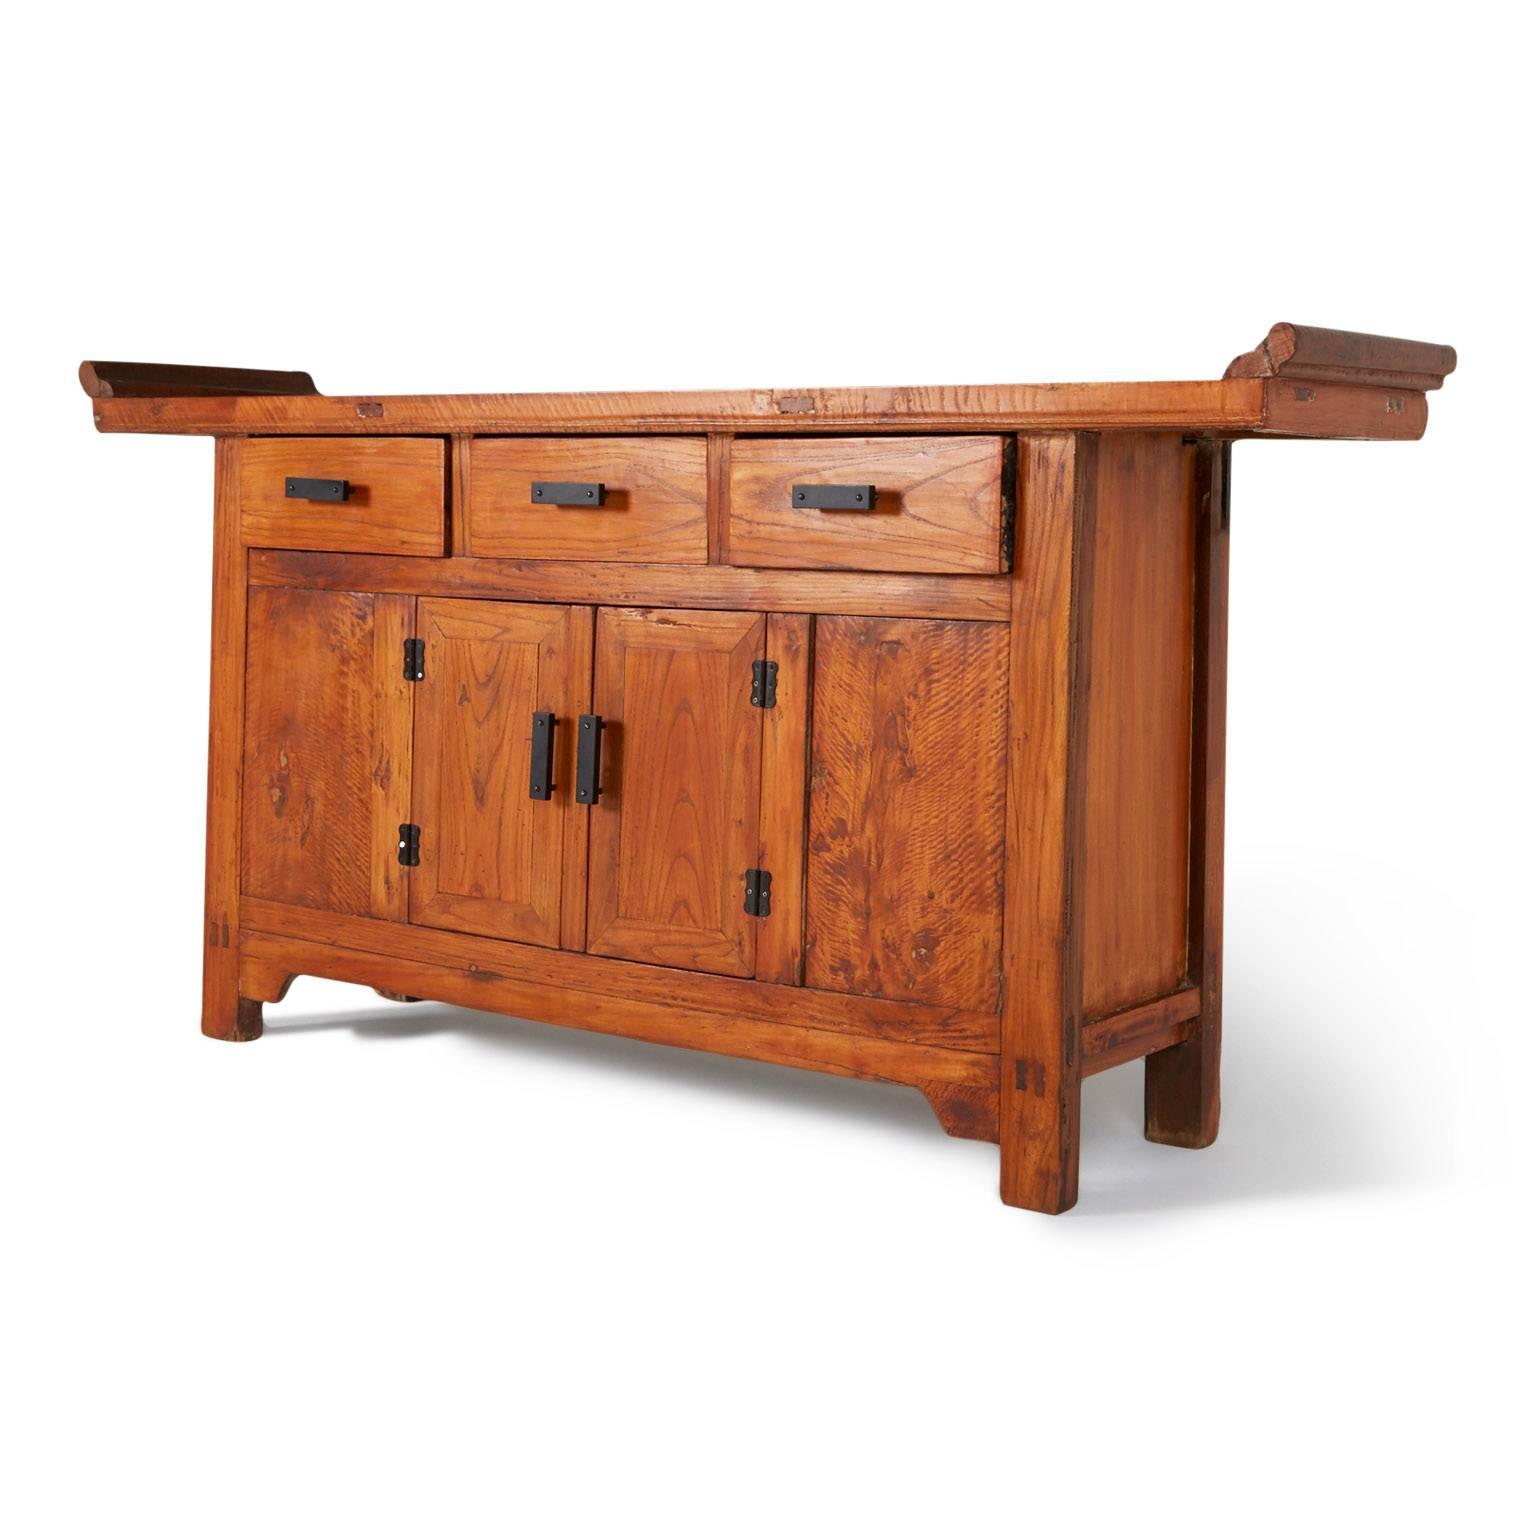 Taking inspiration from the Chinese Shan Xi altar cabinet, this credenza displays elements of North China's traditional cultural style. Comprised from exotic Camphor wood with beautiful grain and including the original black antique hardware. The